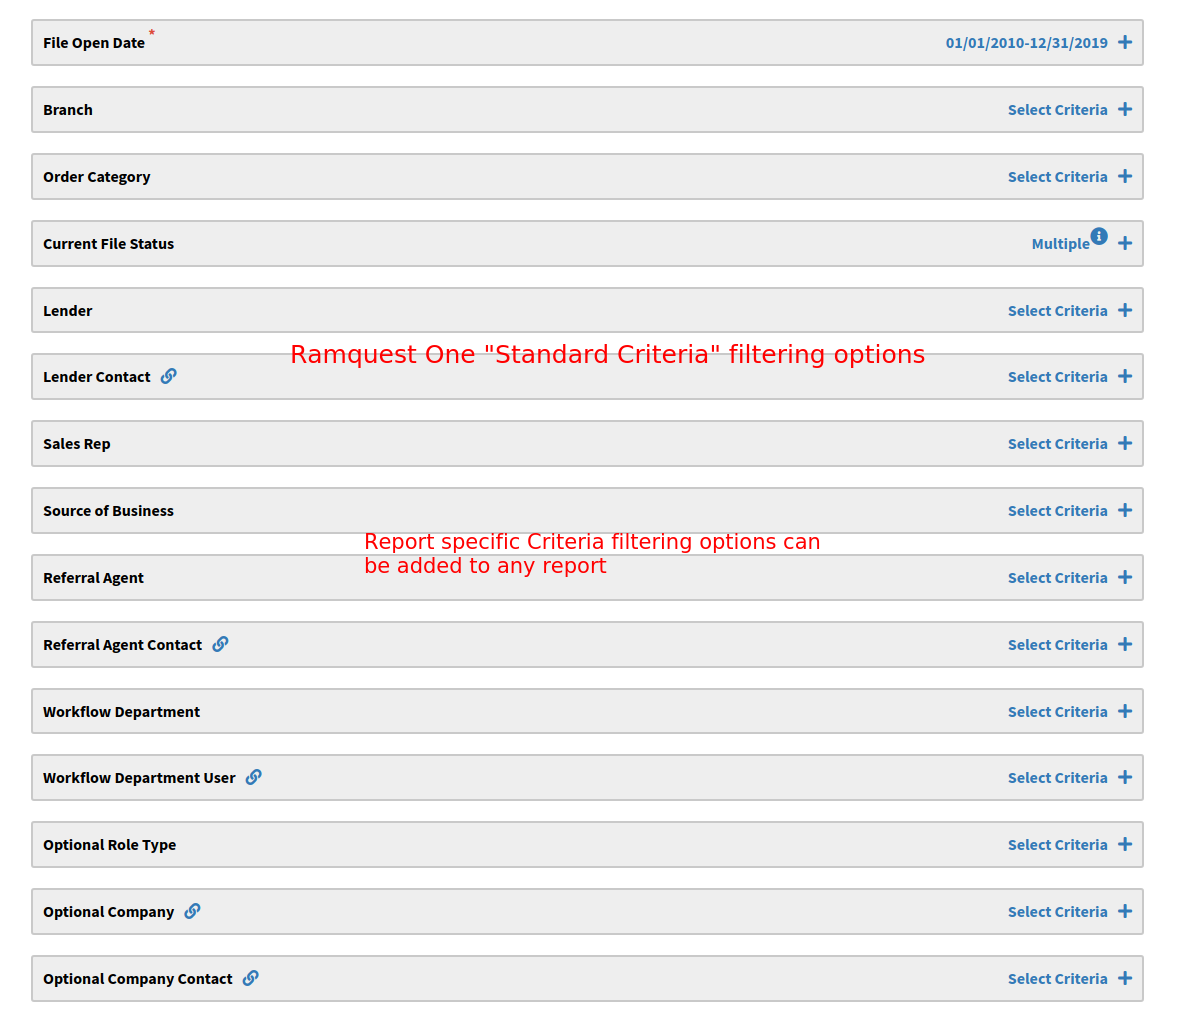 ../_images/standard-criteria-options-ramquest-one.png